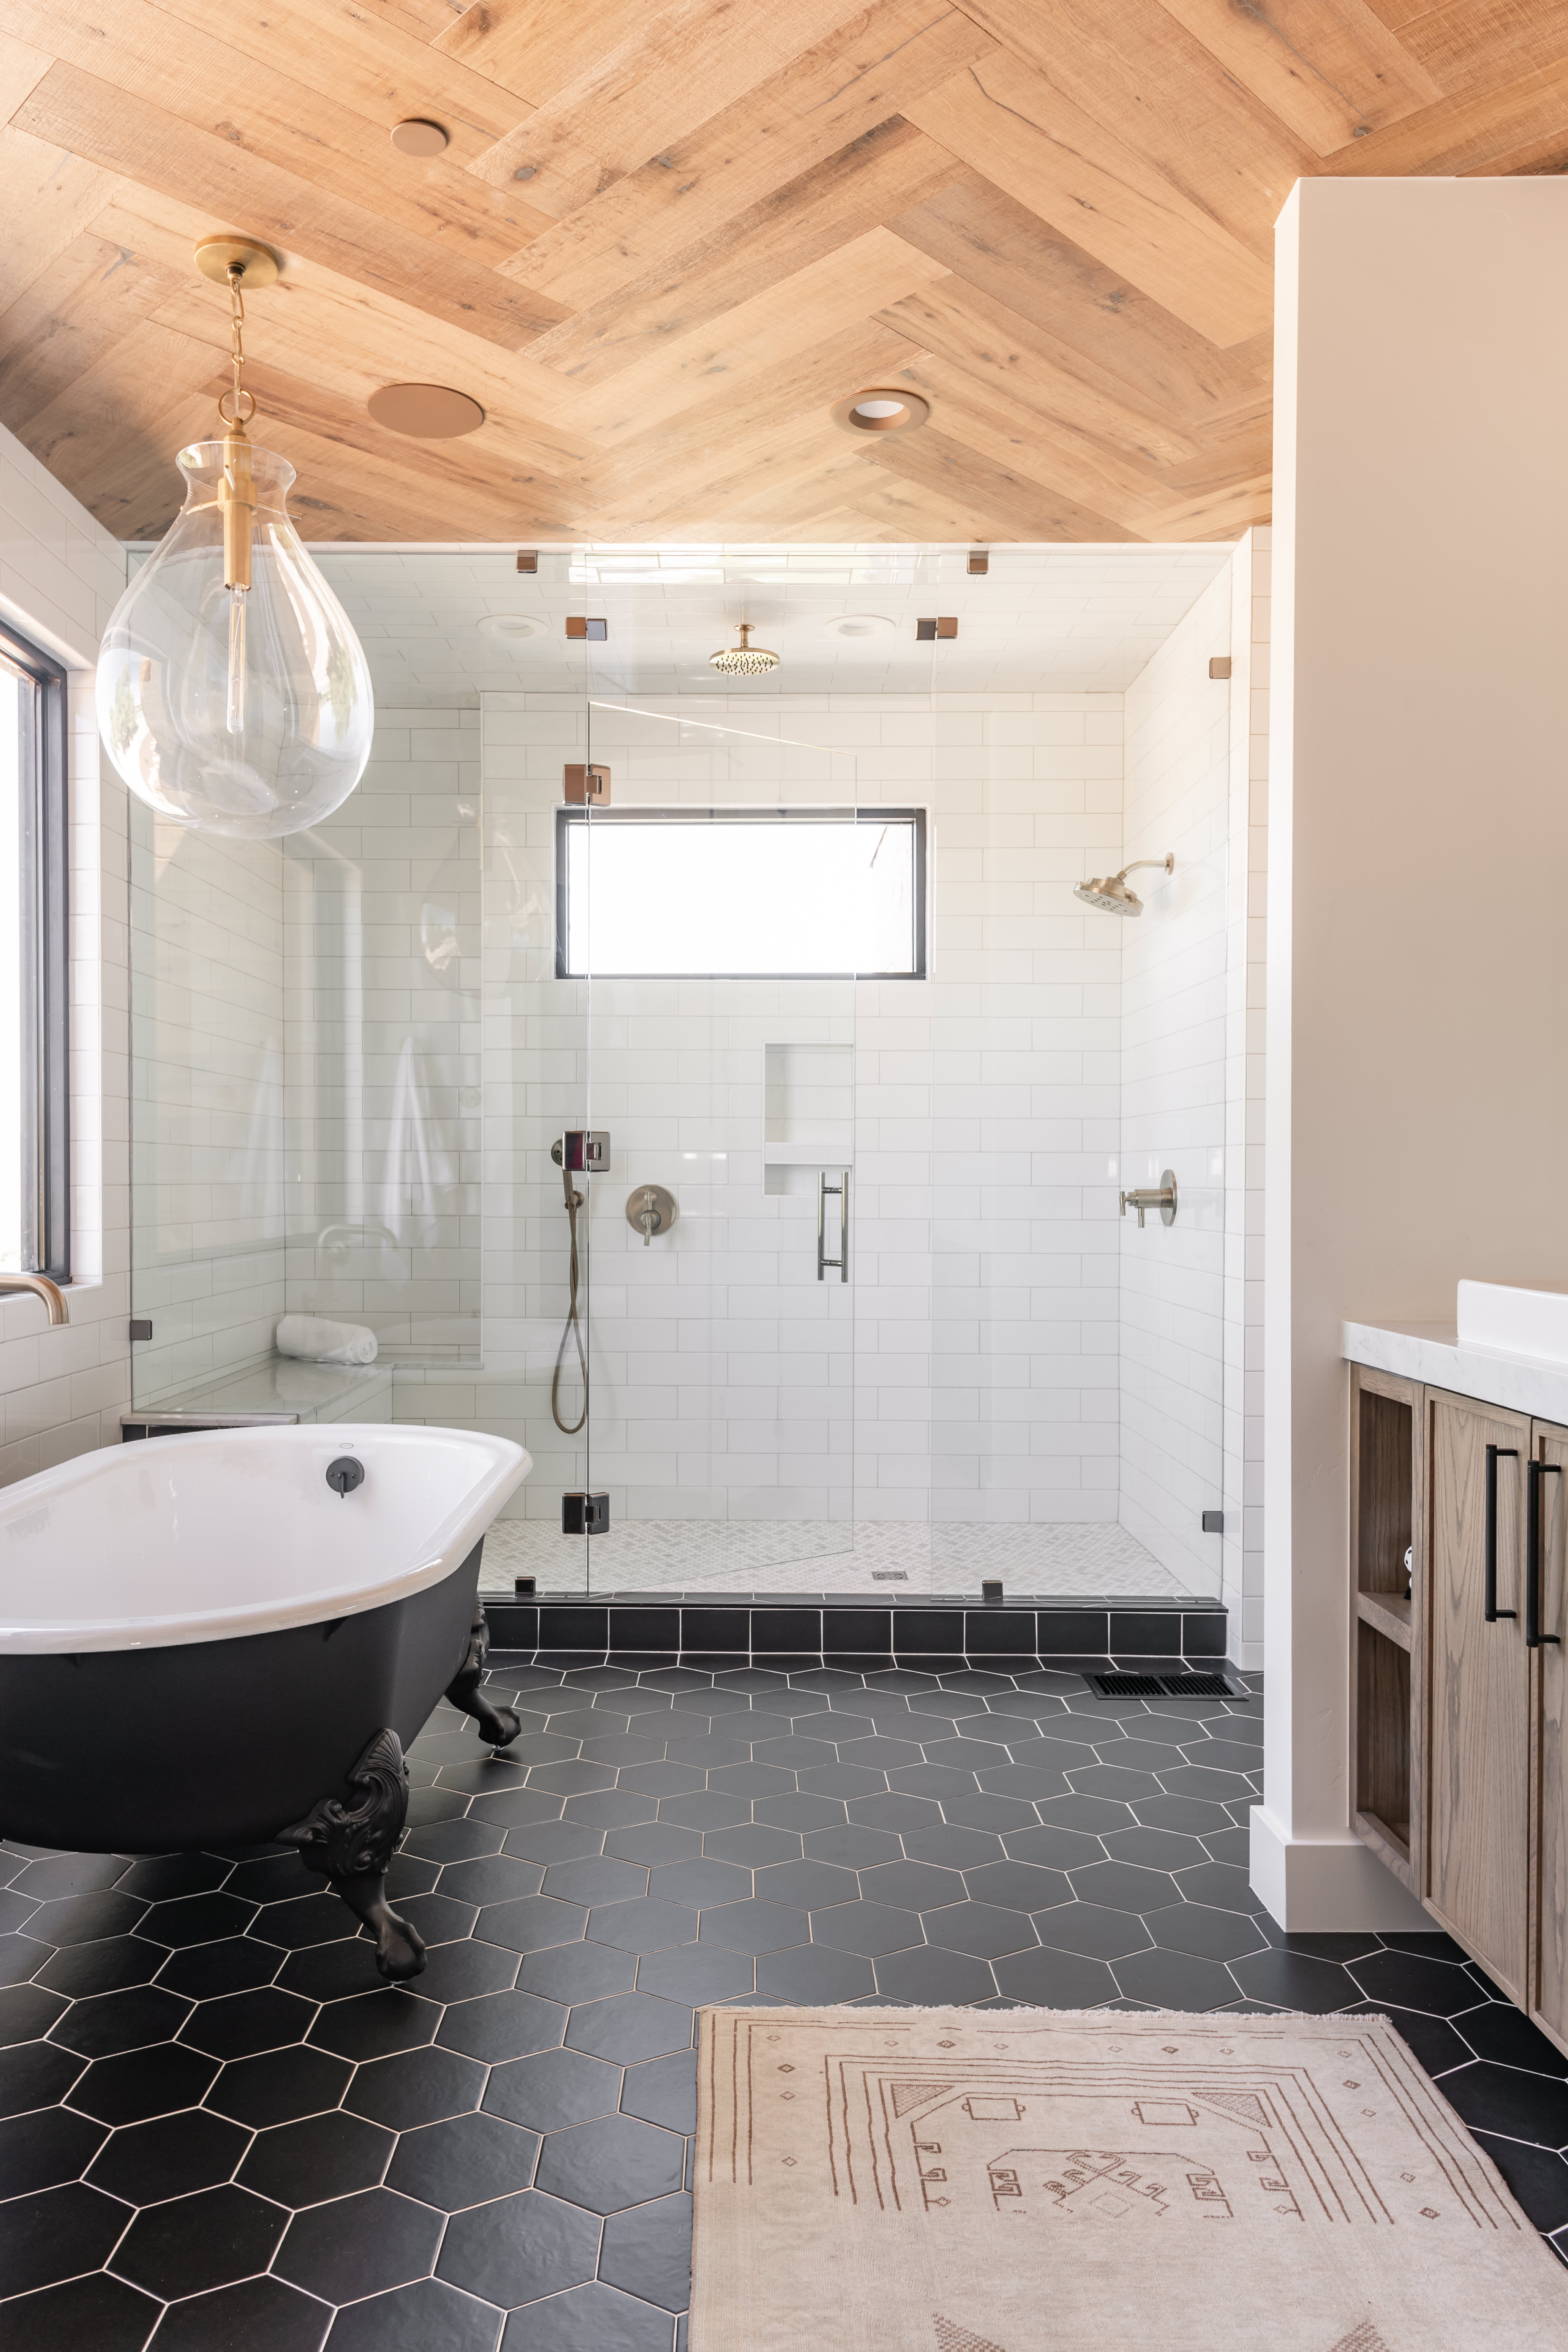 Get Spare Bathroom Remodel Ideas Conquer clutter and add style in your
bath with these chic organizing solutions.